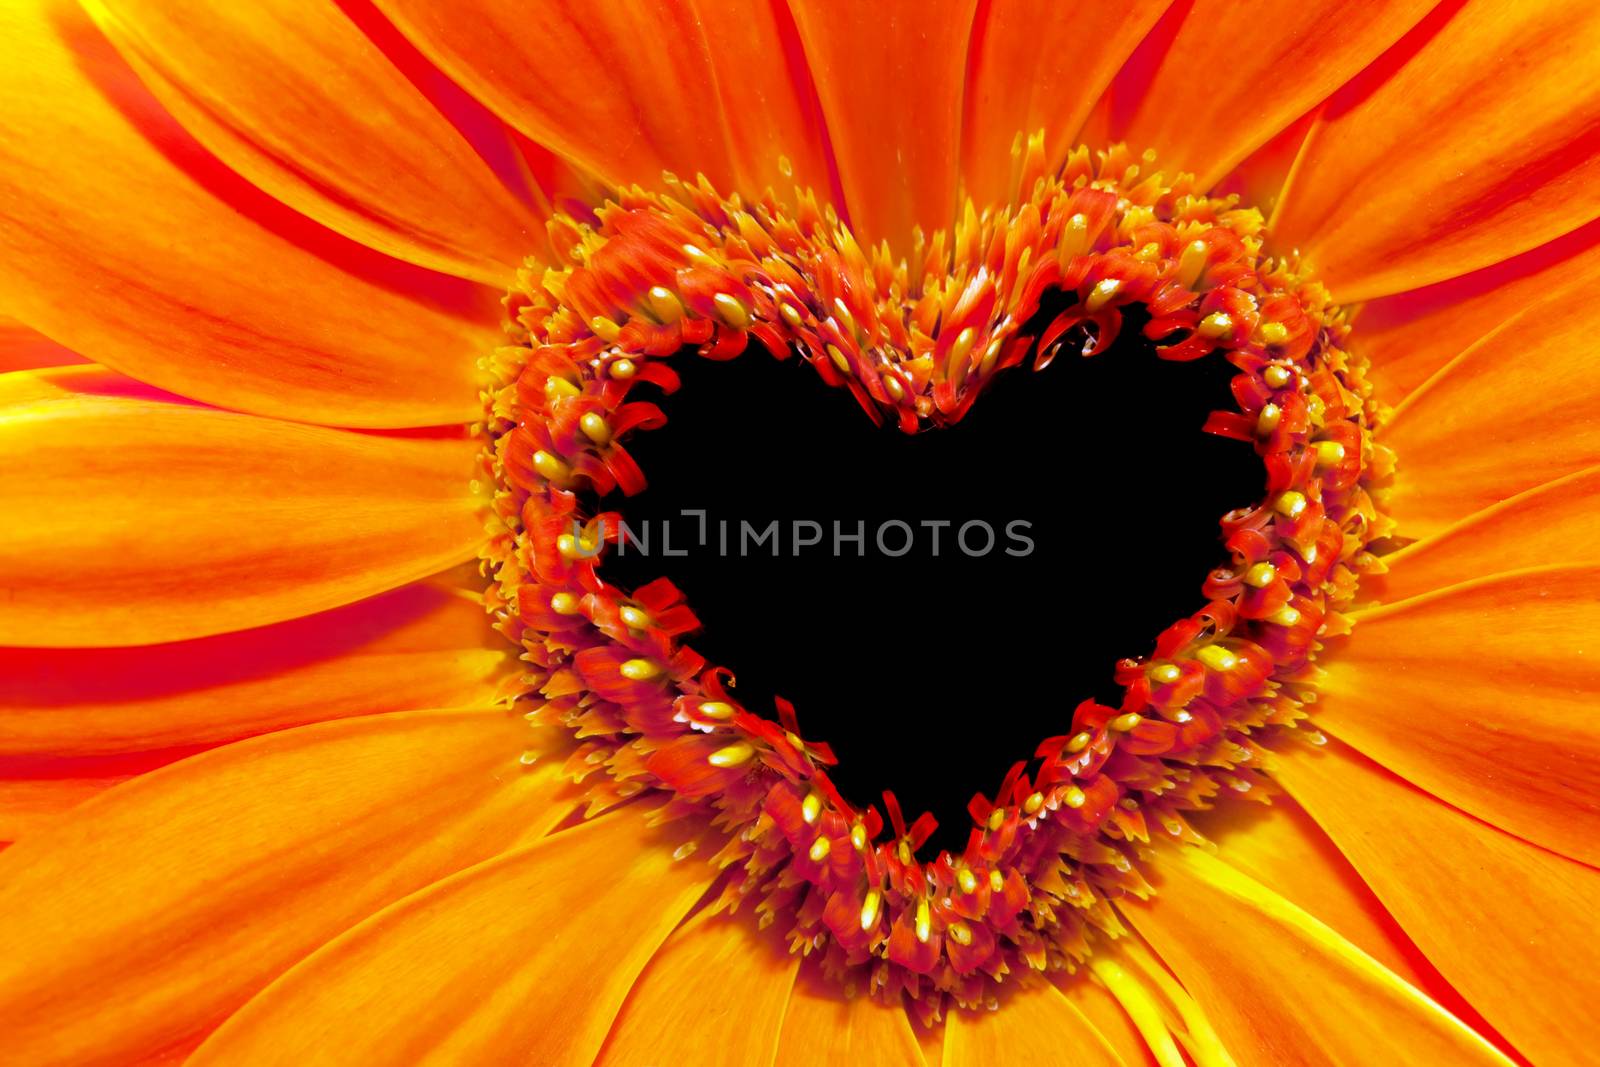 Flower close up with a heart shaped stamens section by photocreo